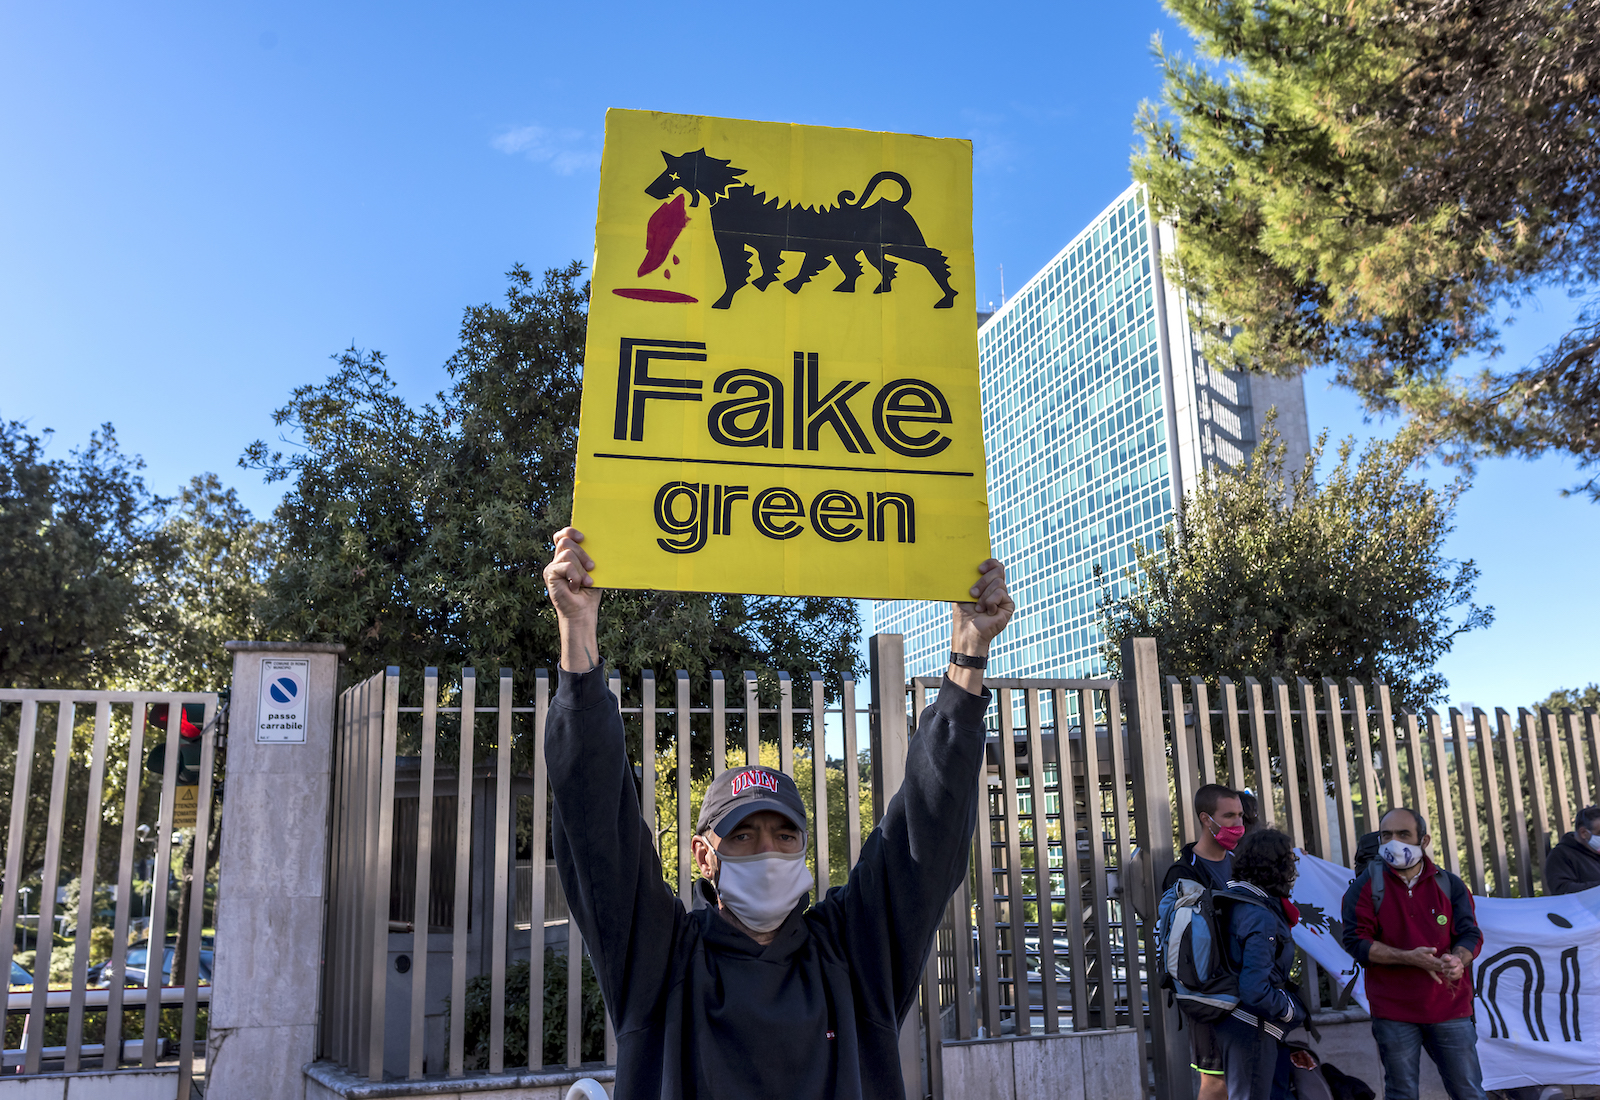 A man protests the energy company Eni as "Fake green."